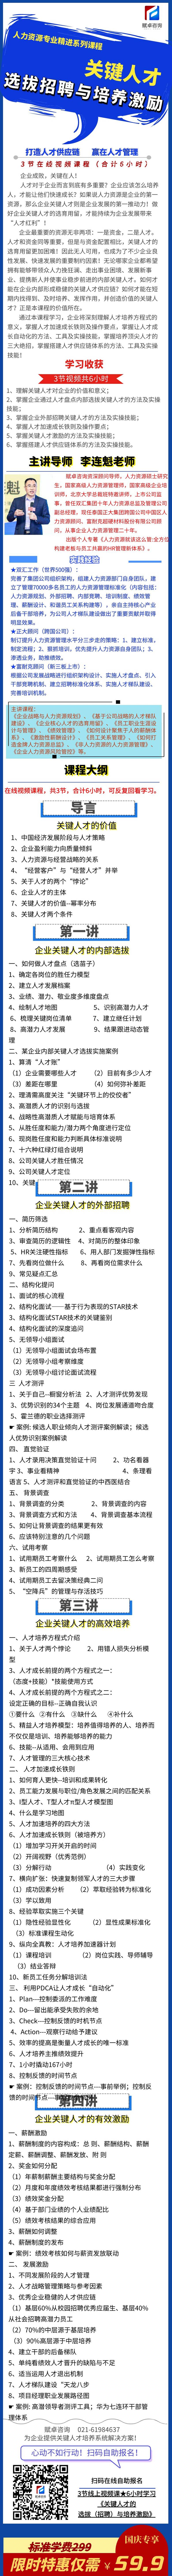 图怪兽_%E5%9B%BE%E6%80%AA%E5%85%BD_40c89bd9952b00dafdcd302cdc226f25_60317.png